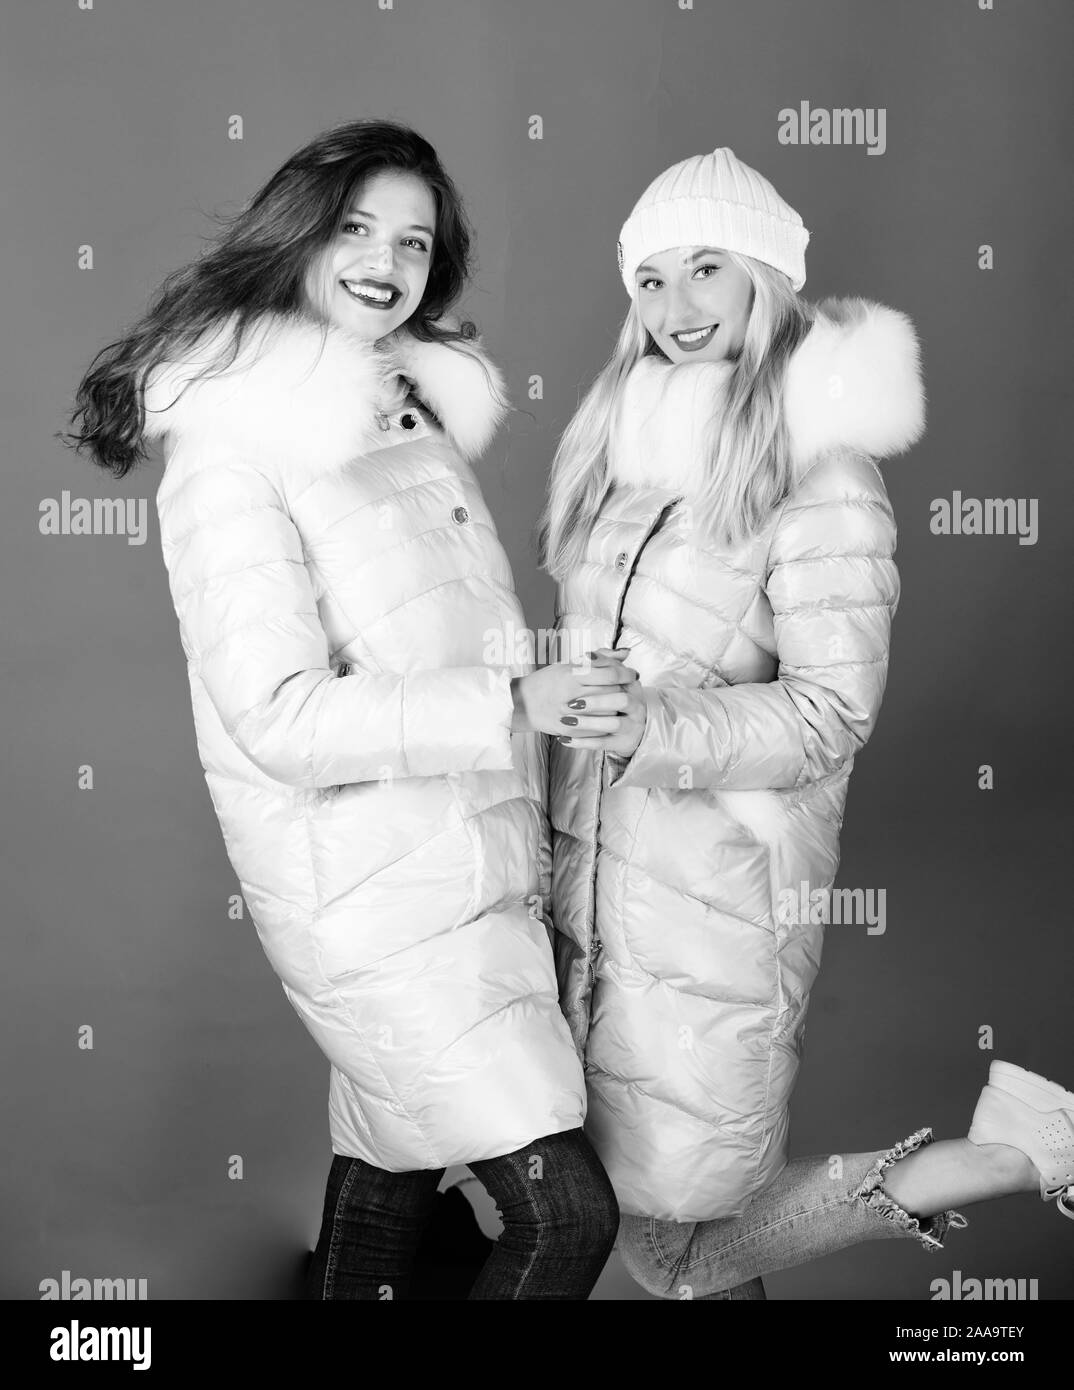 Women wear down jacket with furry hood. Girls smiling makeup faces wear  winter jackets blue background. Fashion friends. Winter season. Soft fur.  For those wishing stay modern. Winter clothes Stock Photo 